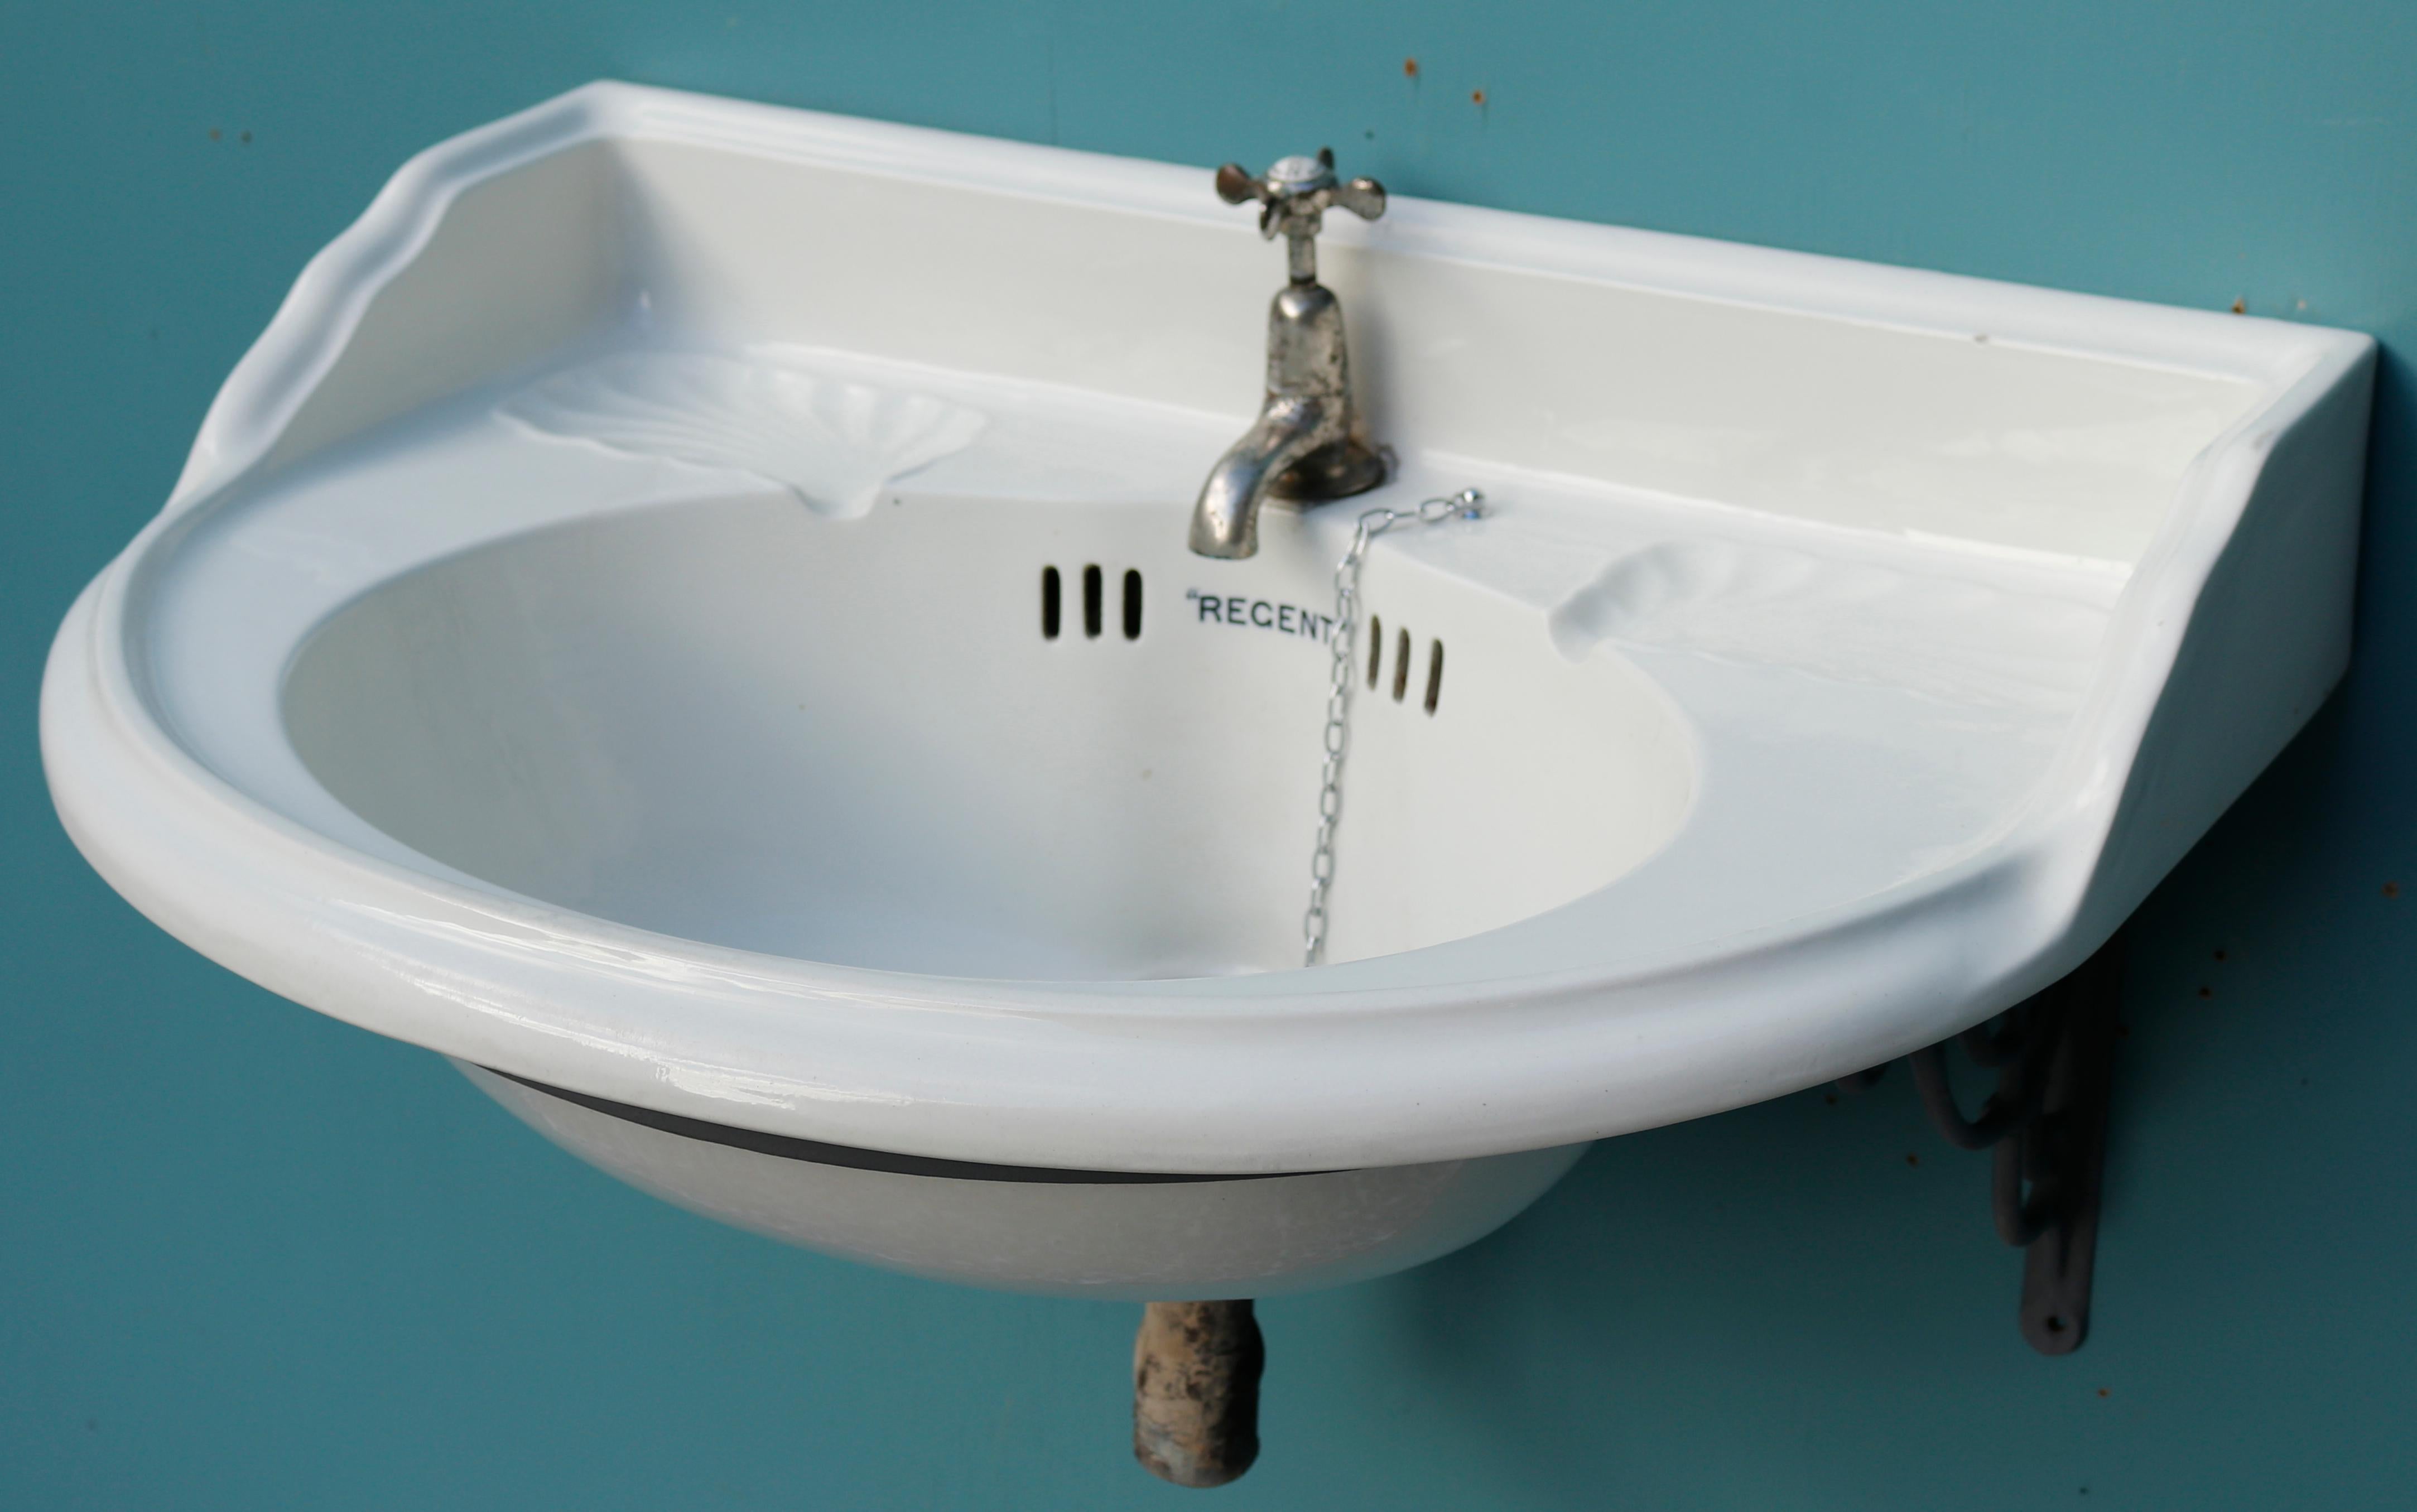 Antique rounded porcelain sink with bracket. This sink was manufactured by Morrison Ingram & Co. It was reclaimed from a church in Glasgow along with two other matching basins. All three are in very good condition, having ben removed and stored in